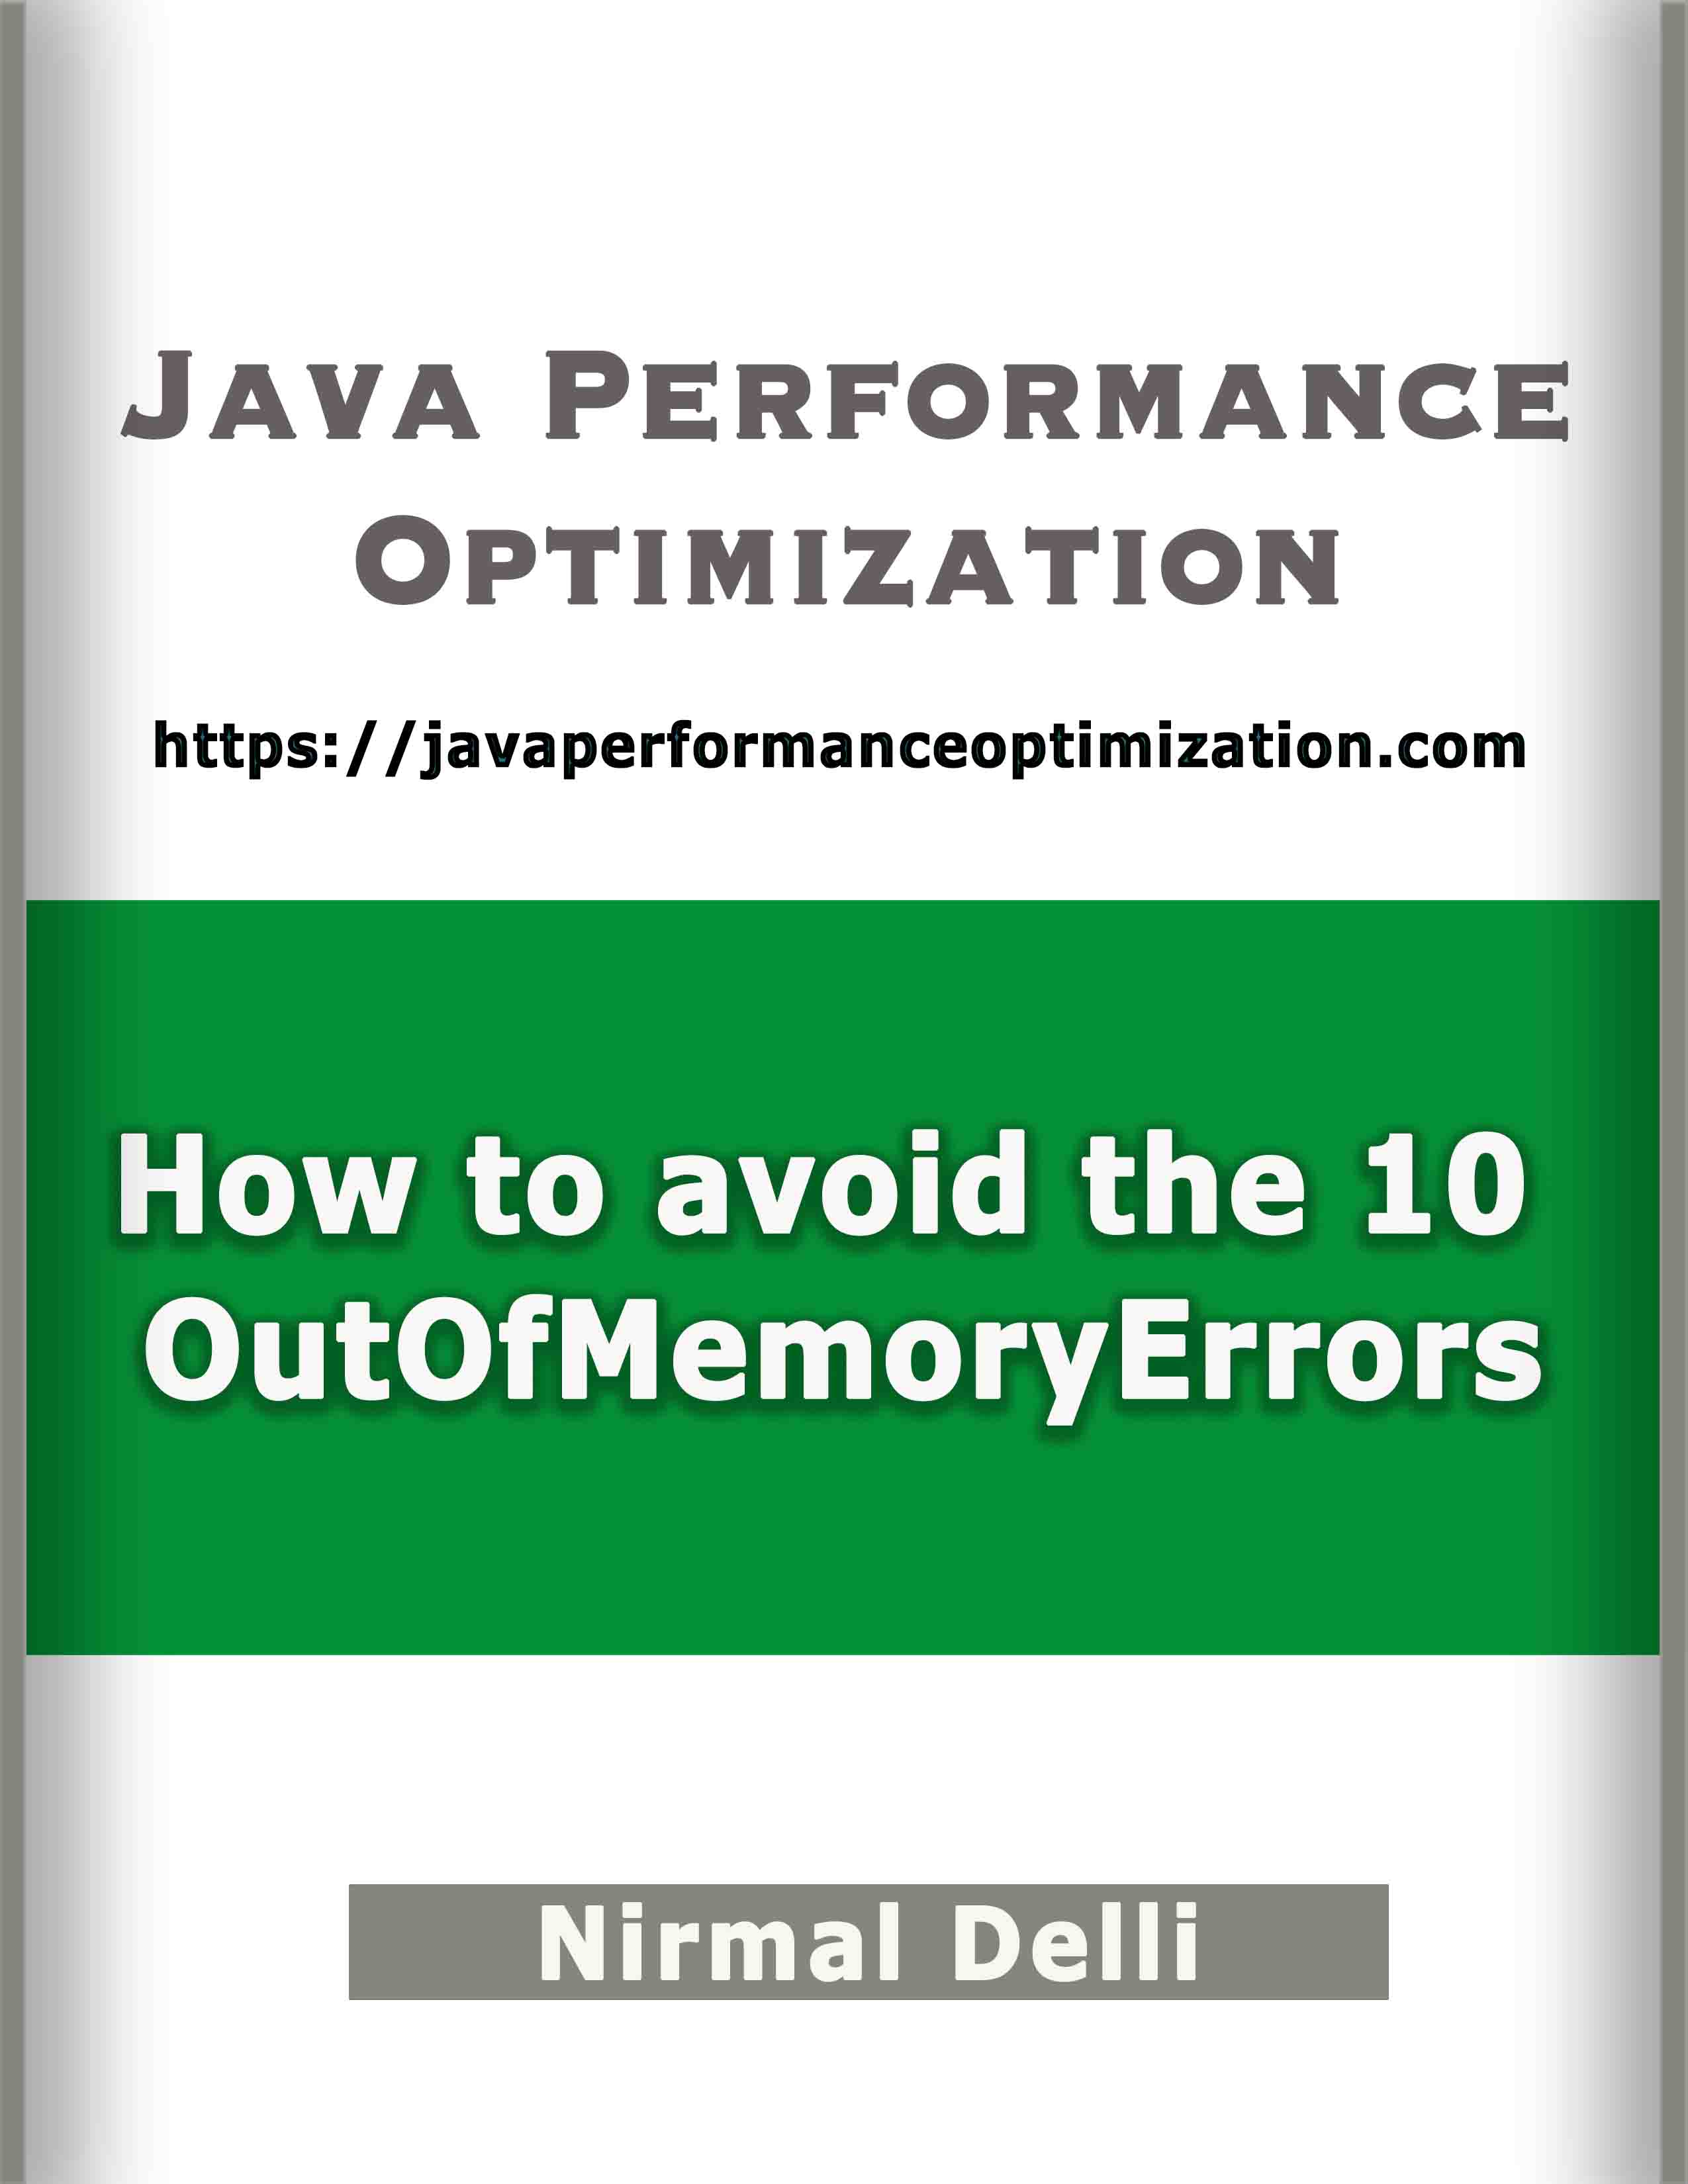 Java performance optimization - How to avoid the top 10 OOMs